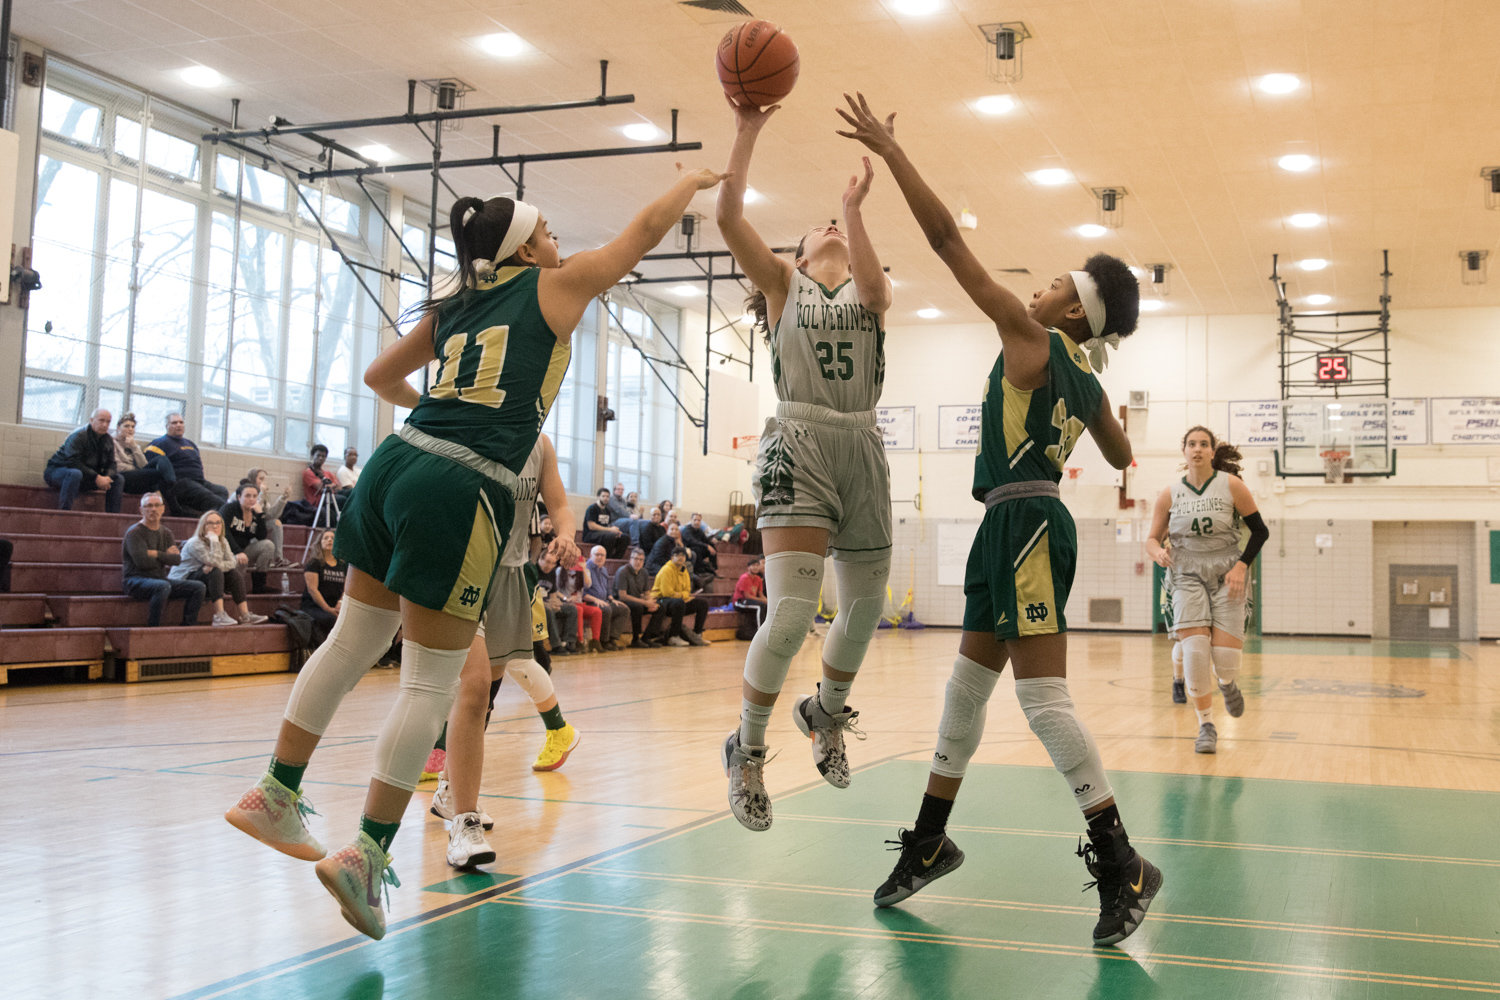 Bronx Science junior guard Carolina Lopez was mired in foul trouble against New Dorp last week, and was held to 12 points in the Wolverines’ playoff loss to the Cougars.